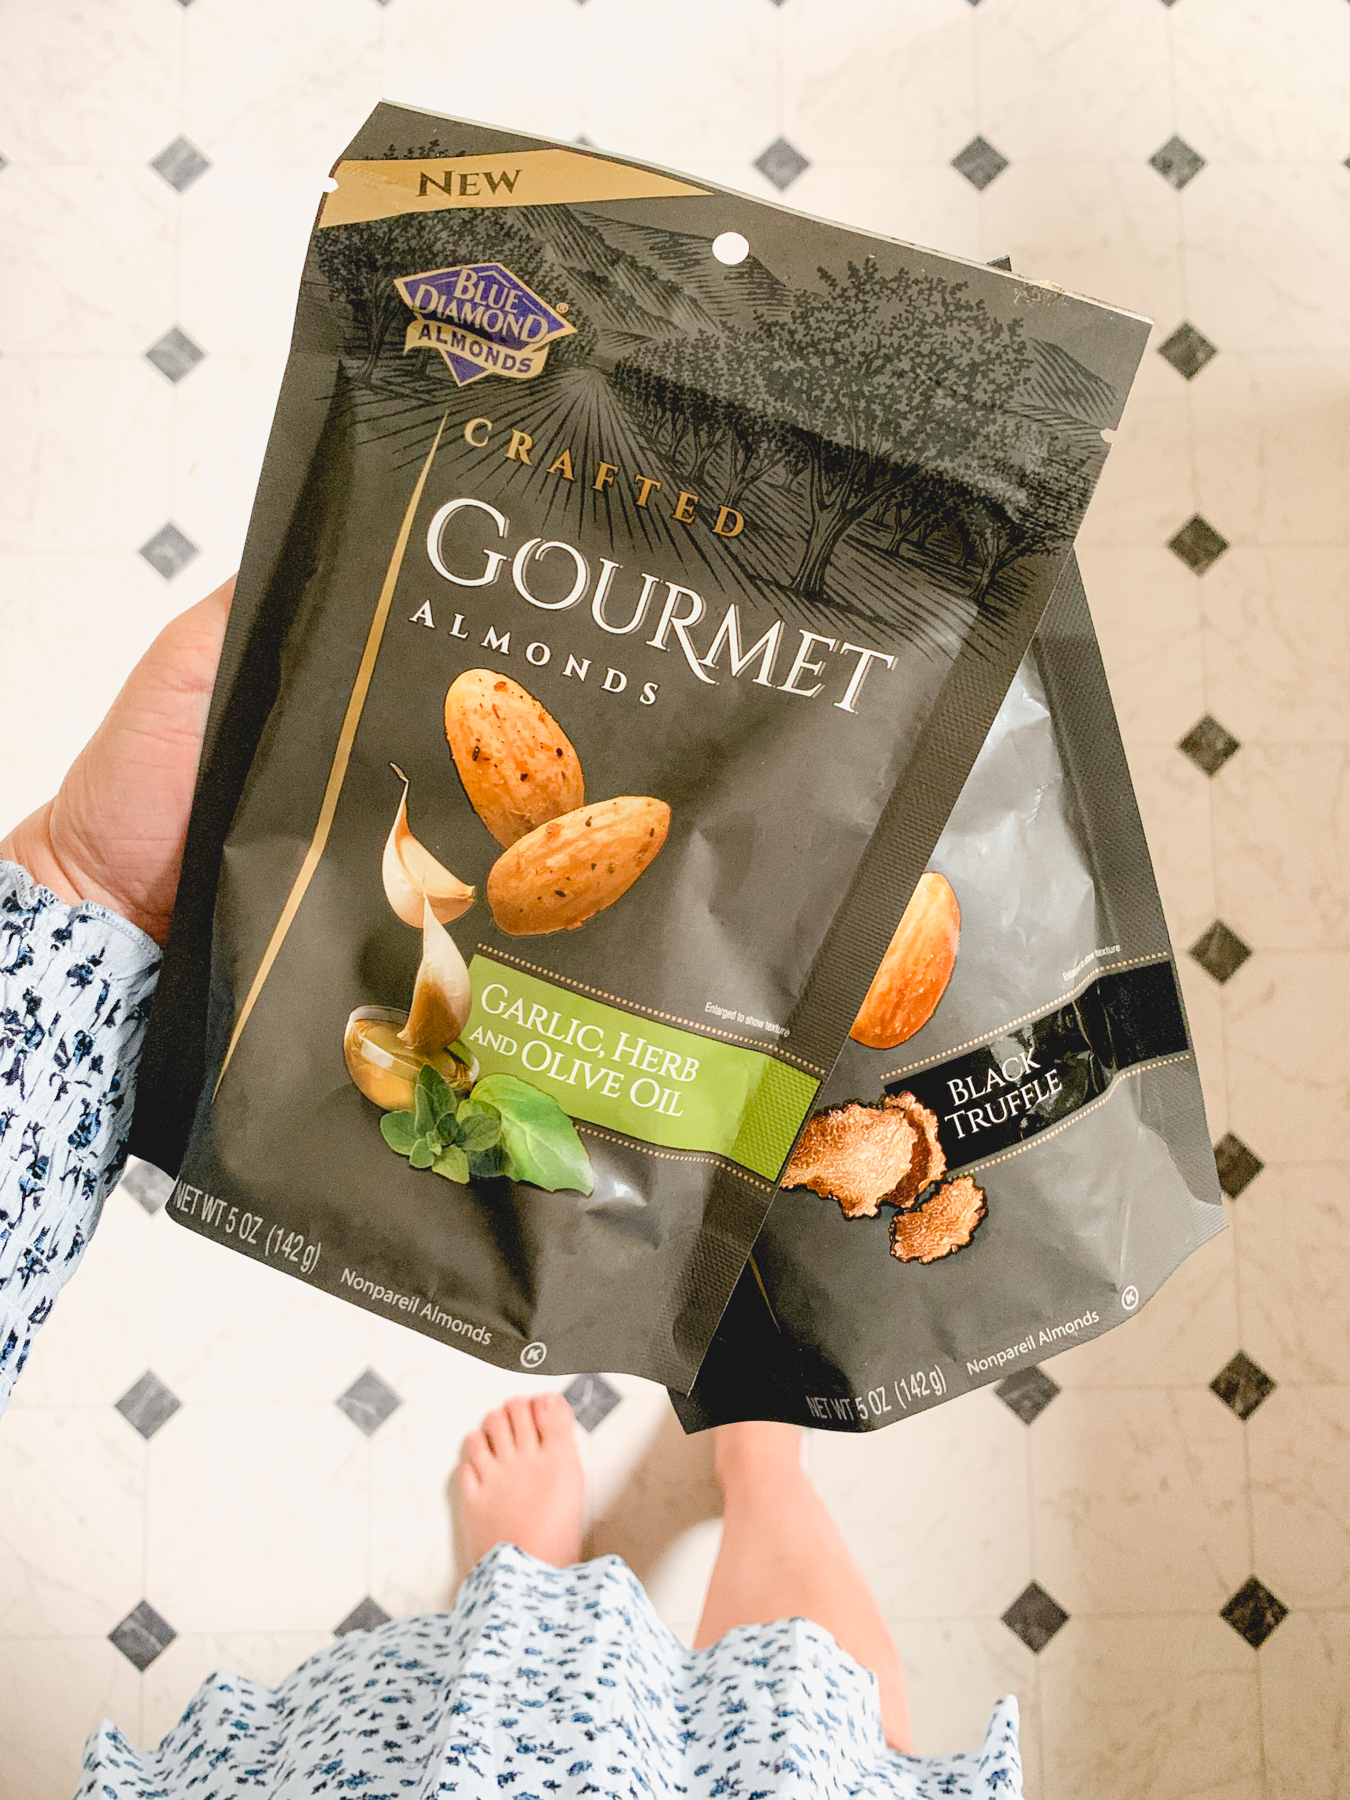 holding two bags of blue diamond gourmet almonds